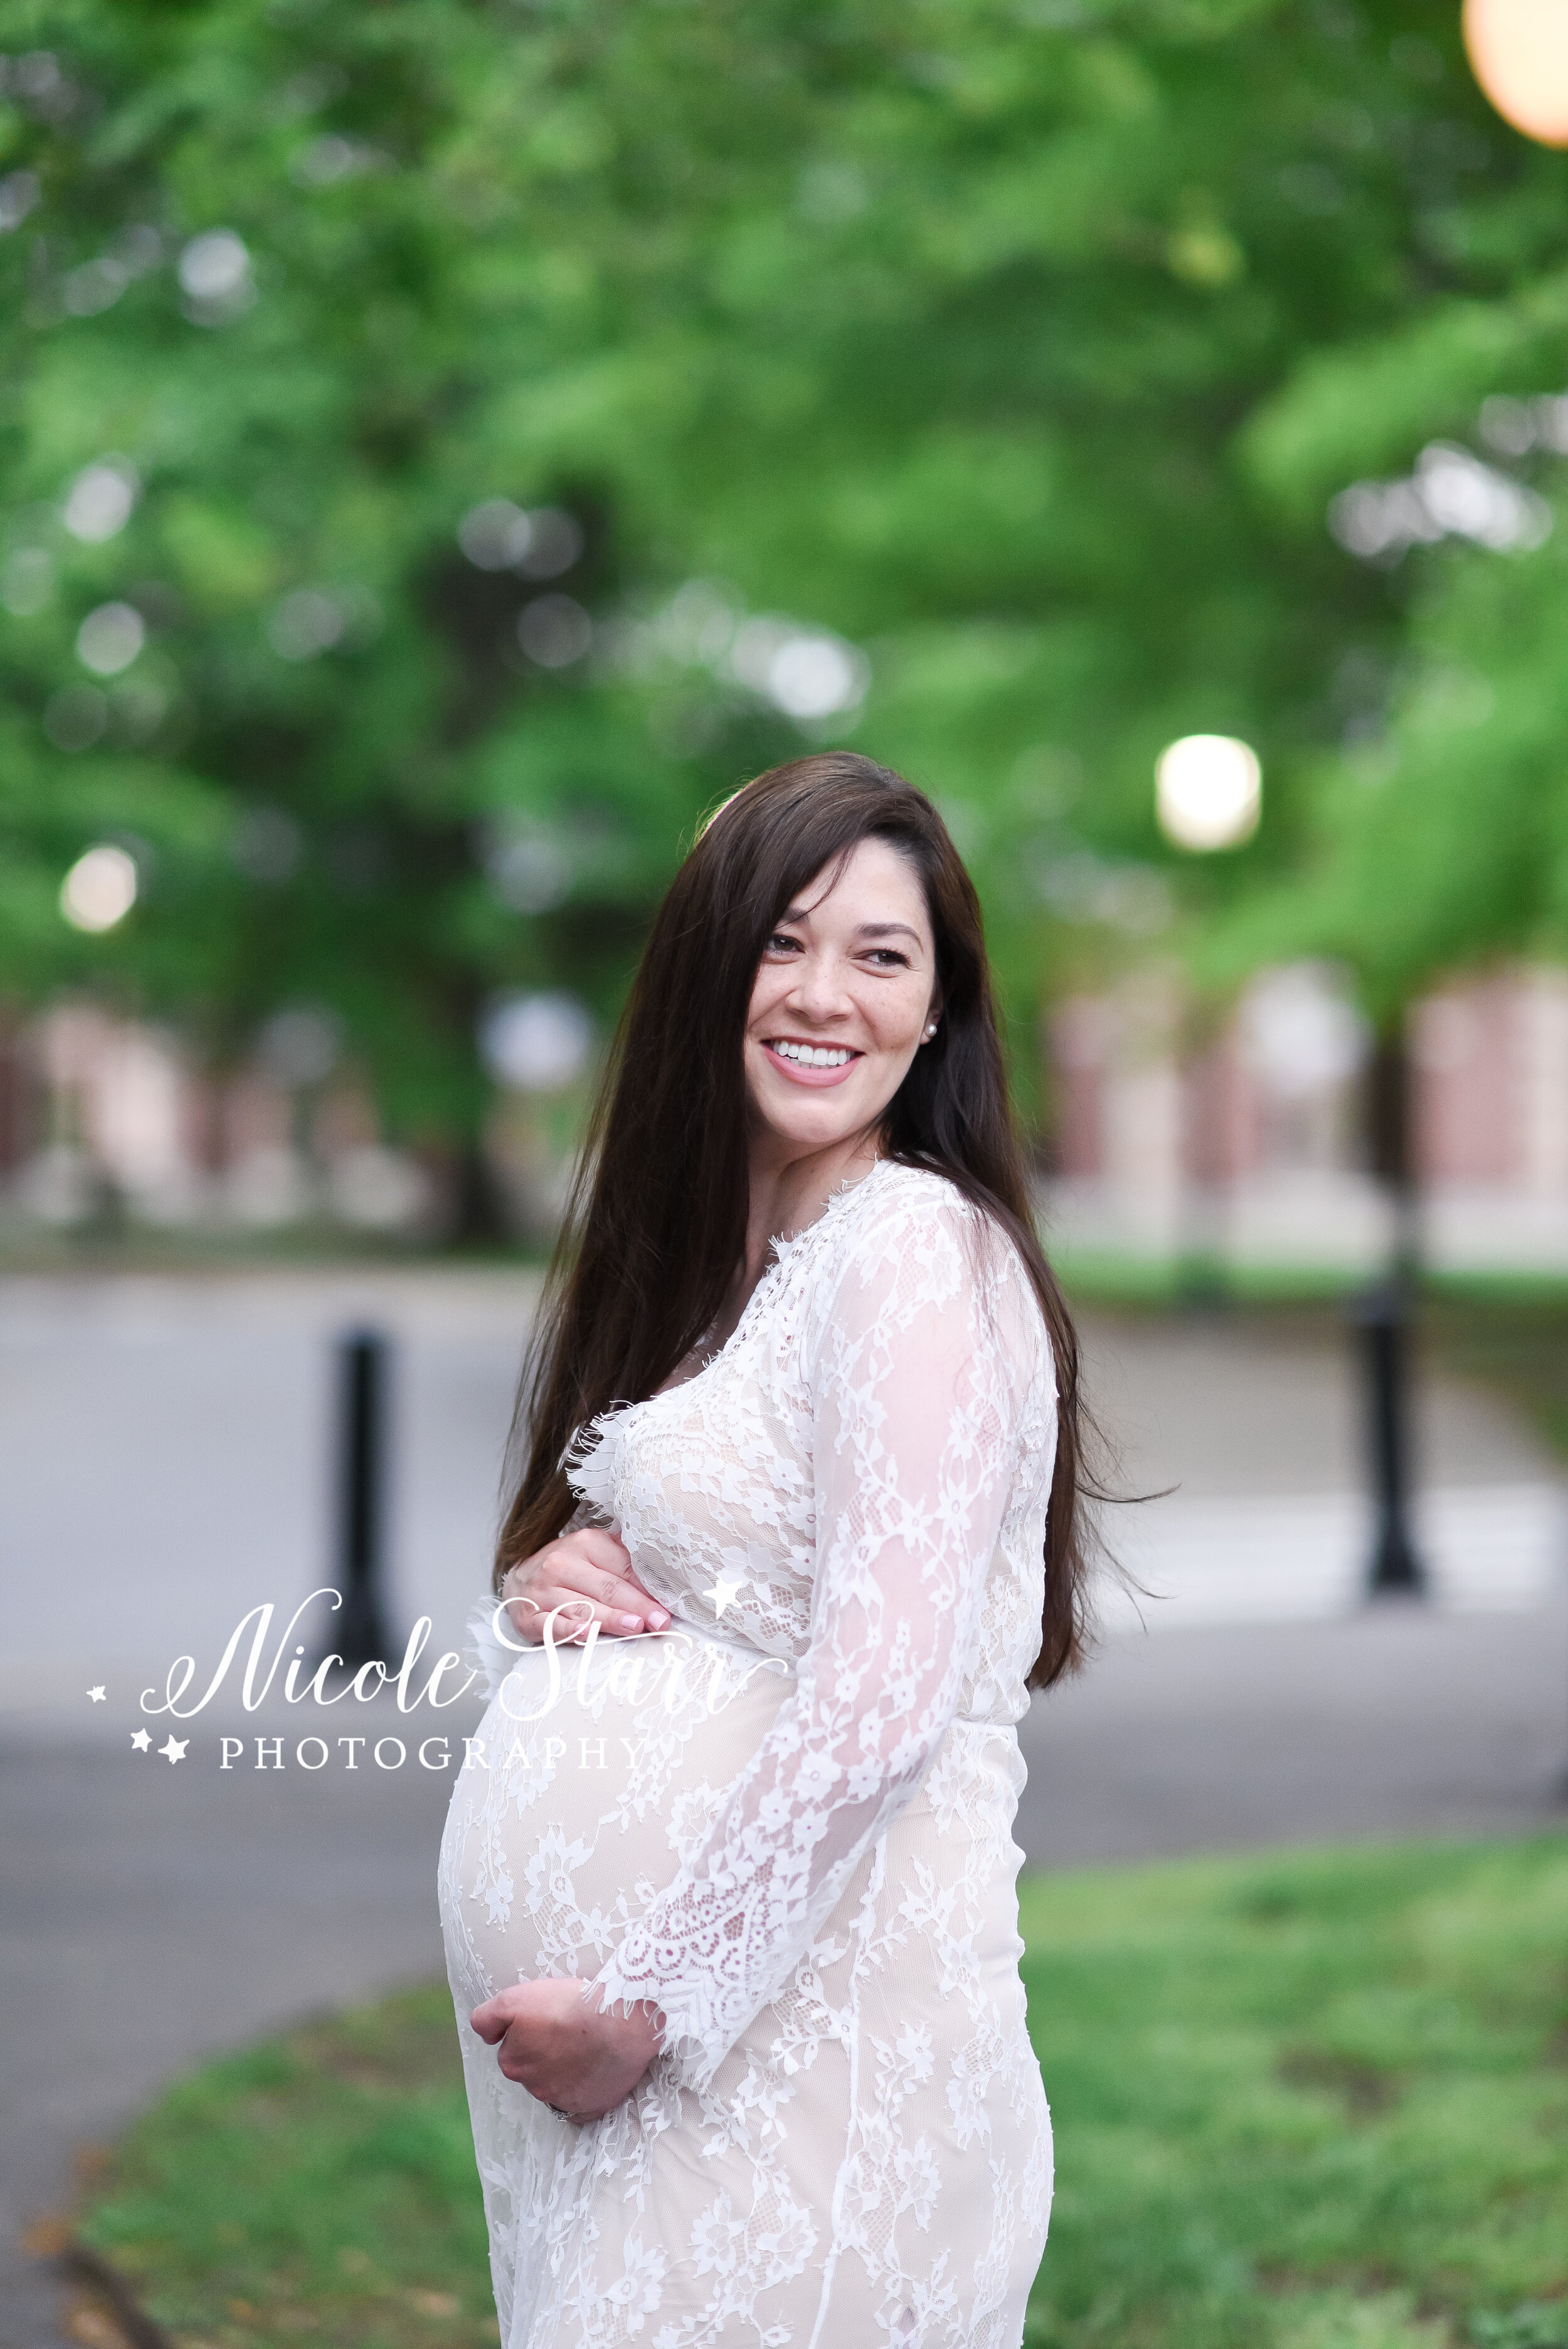 What should a pregnant woman - Monica Brazier Photography